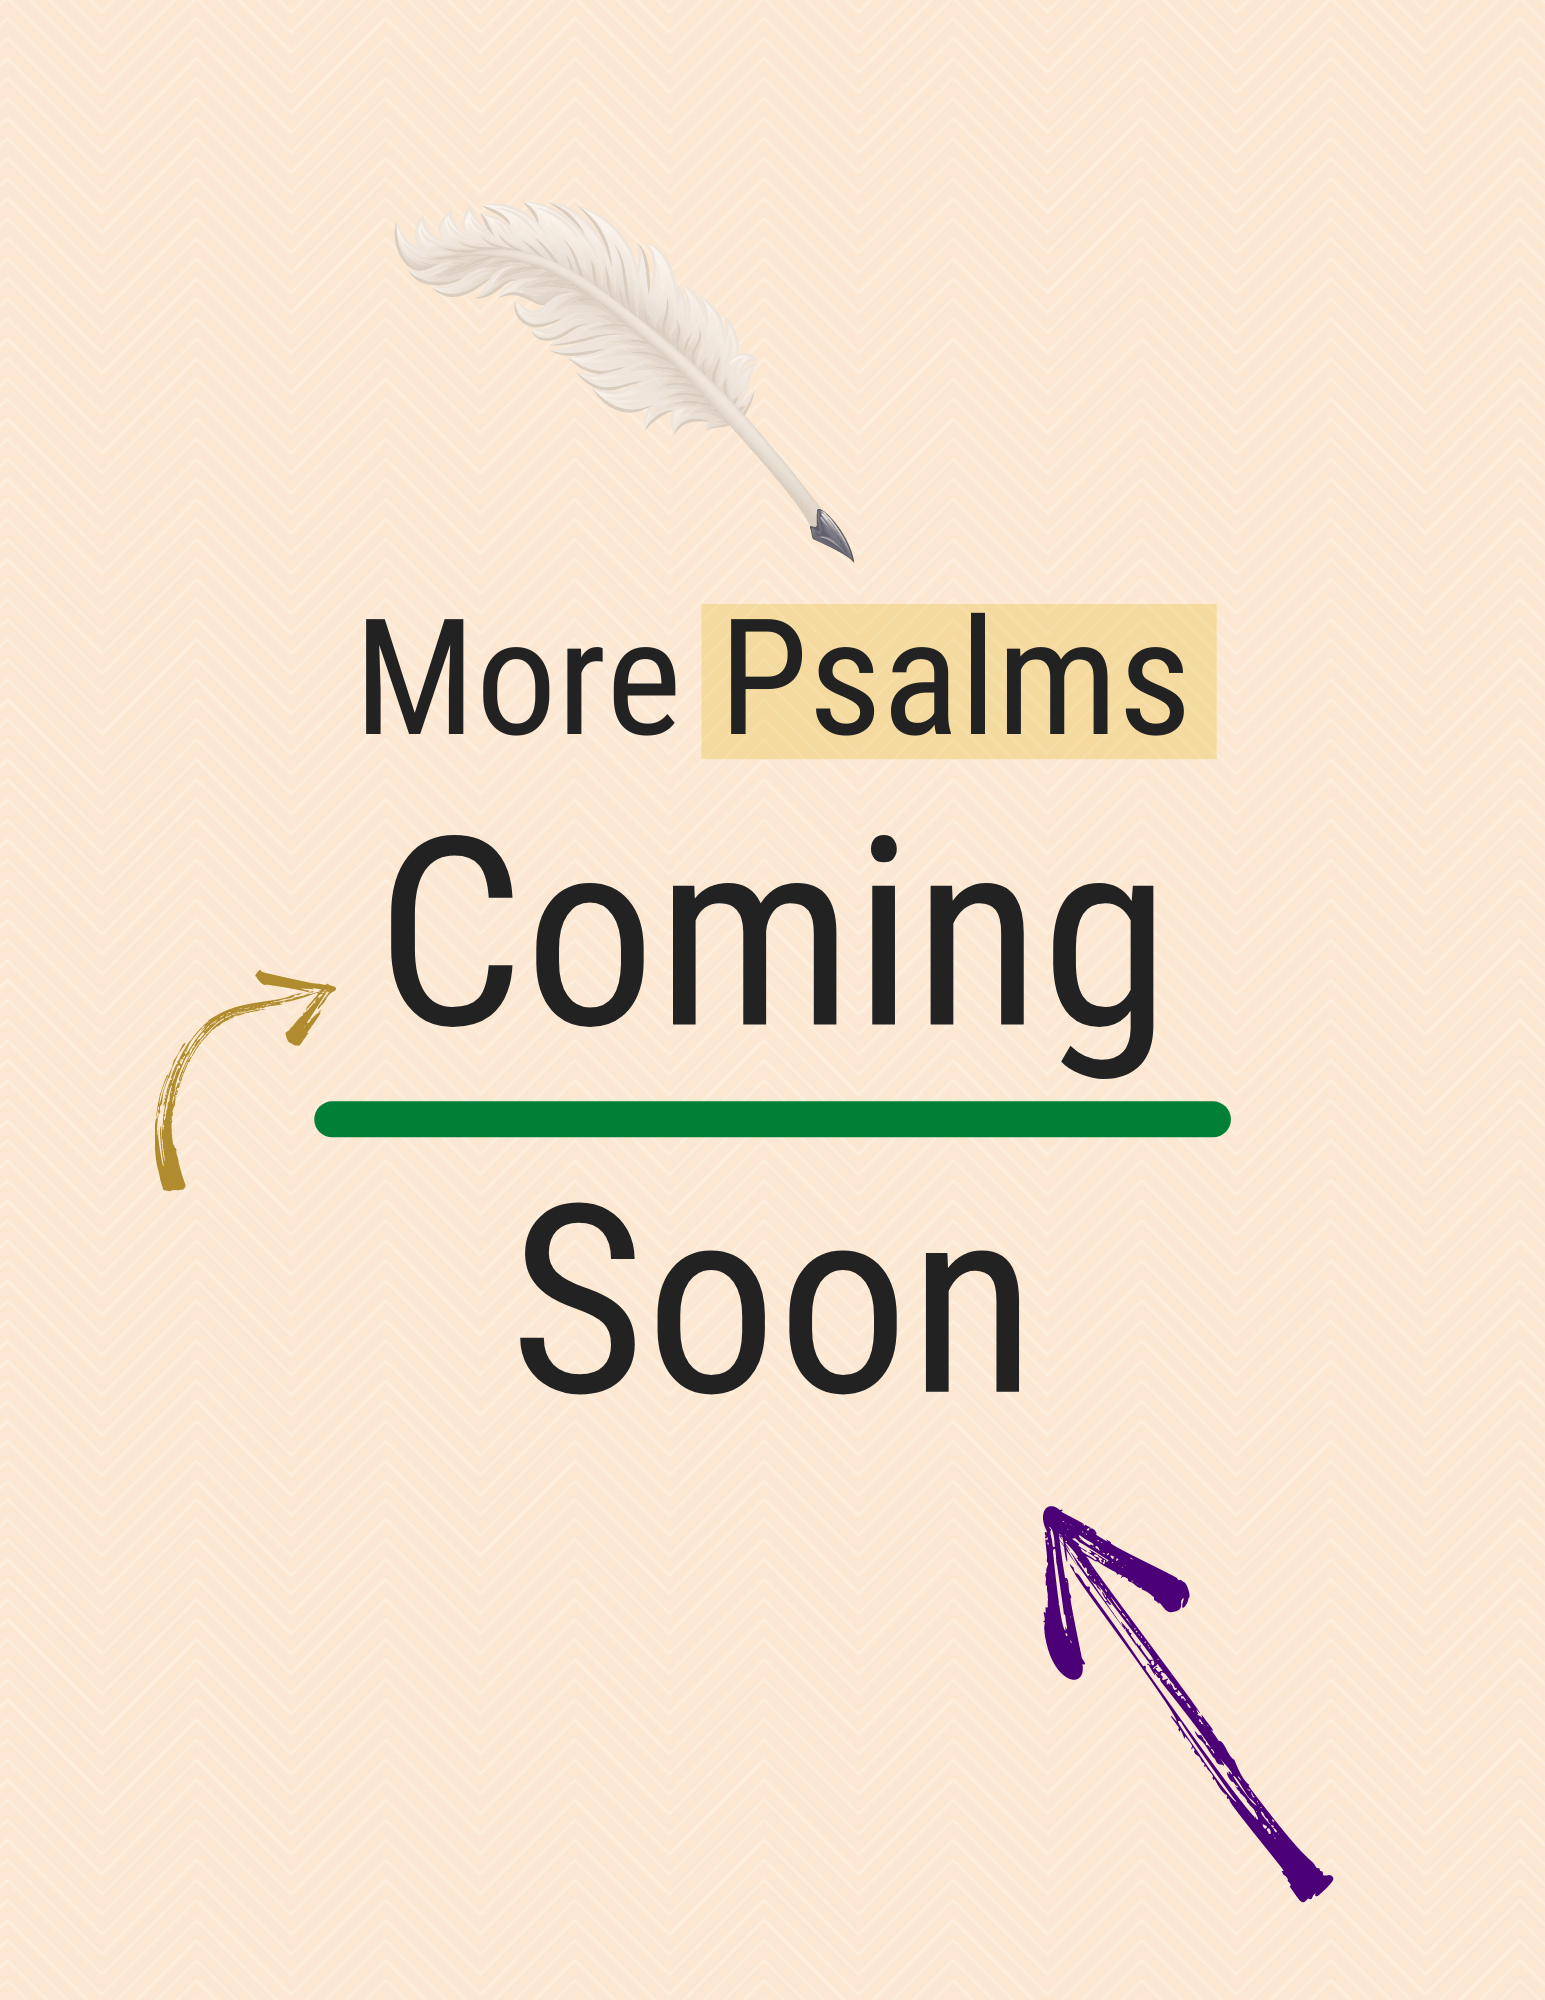 More psalms coming soon"